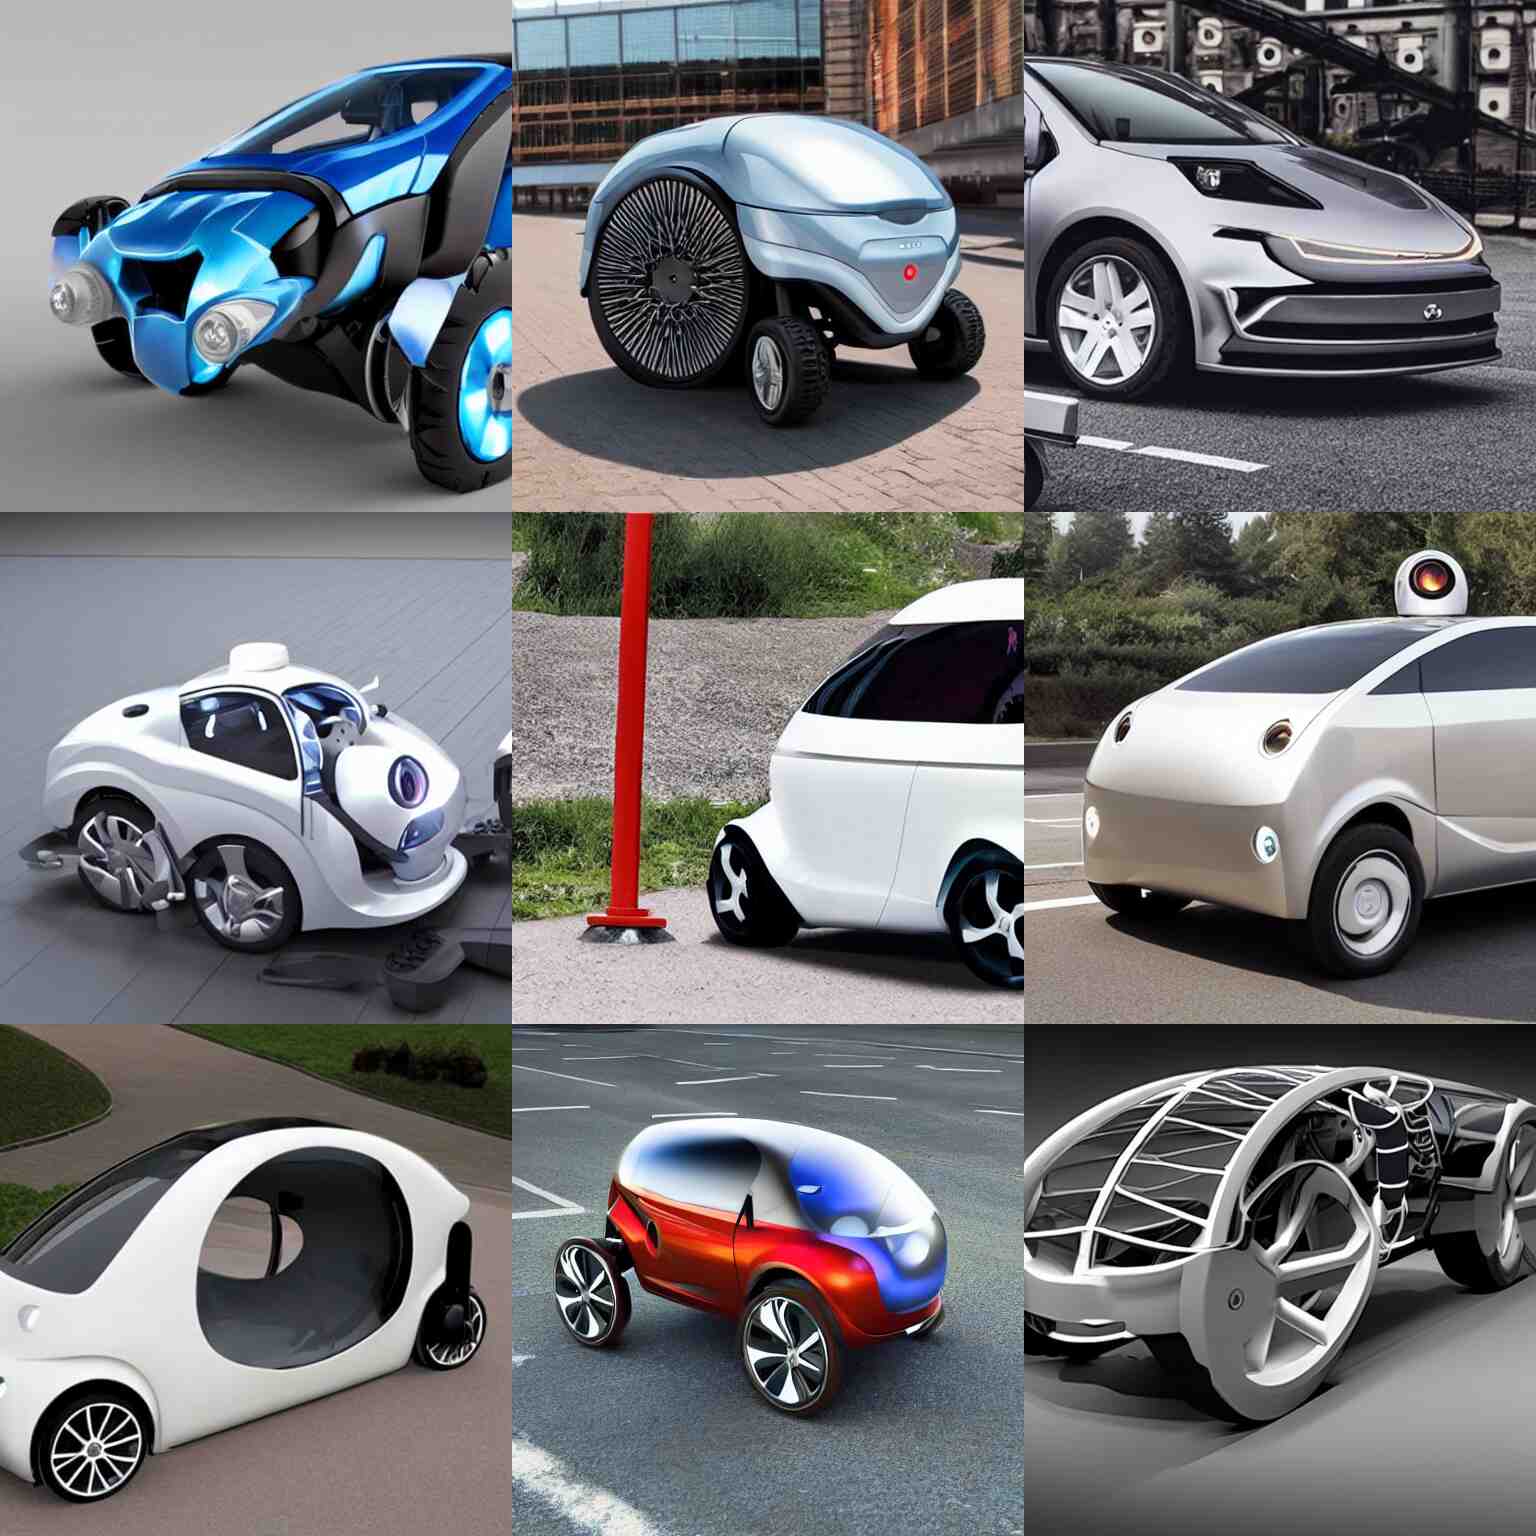 3 Main Reasons To Employ An API For Categorizing Car Images